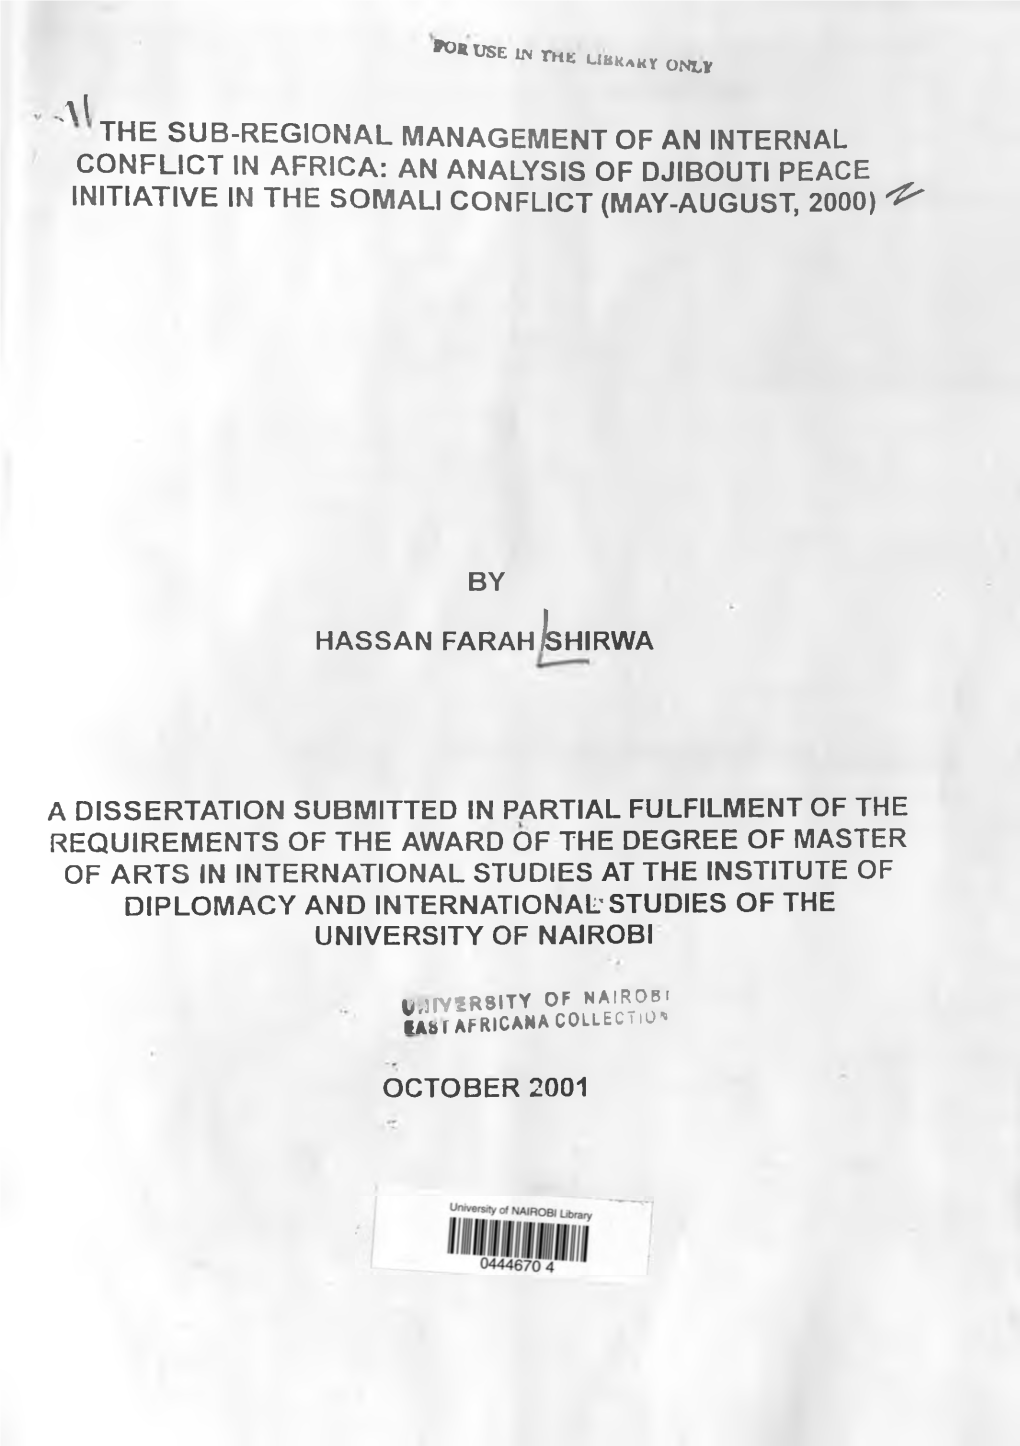 The Sub-Regional Management of an Internal Conflict in Africa: an Analysis of Djibouti Peace Initiative in the Somali Conflict (May-August, 2000) ^